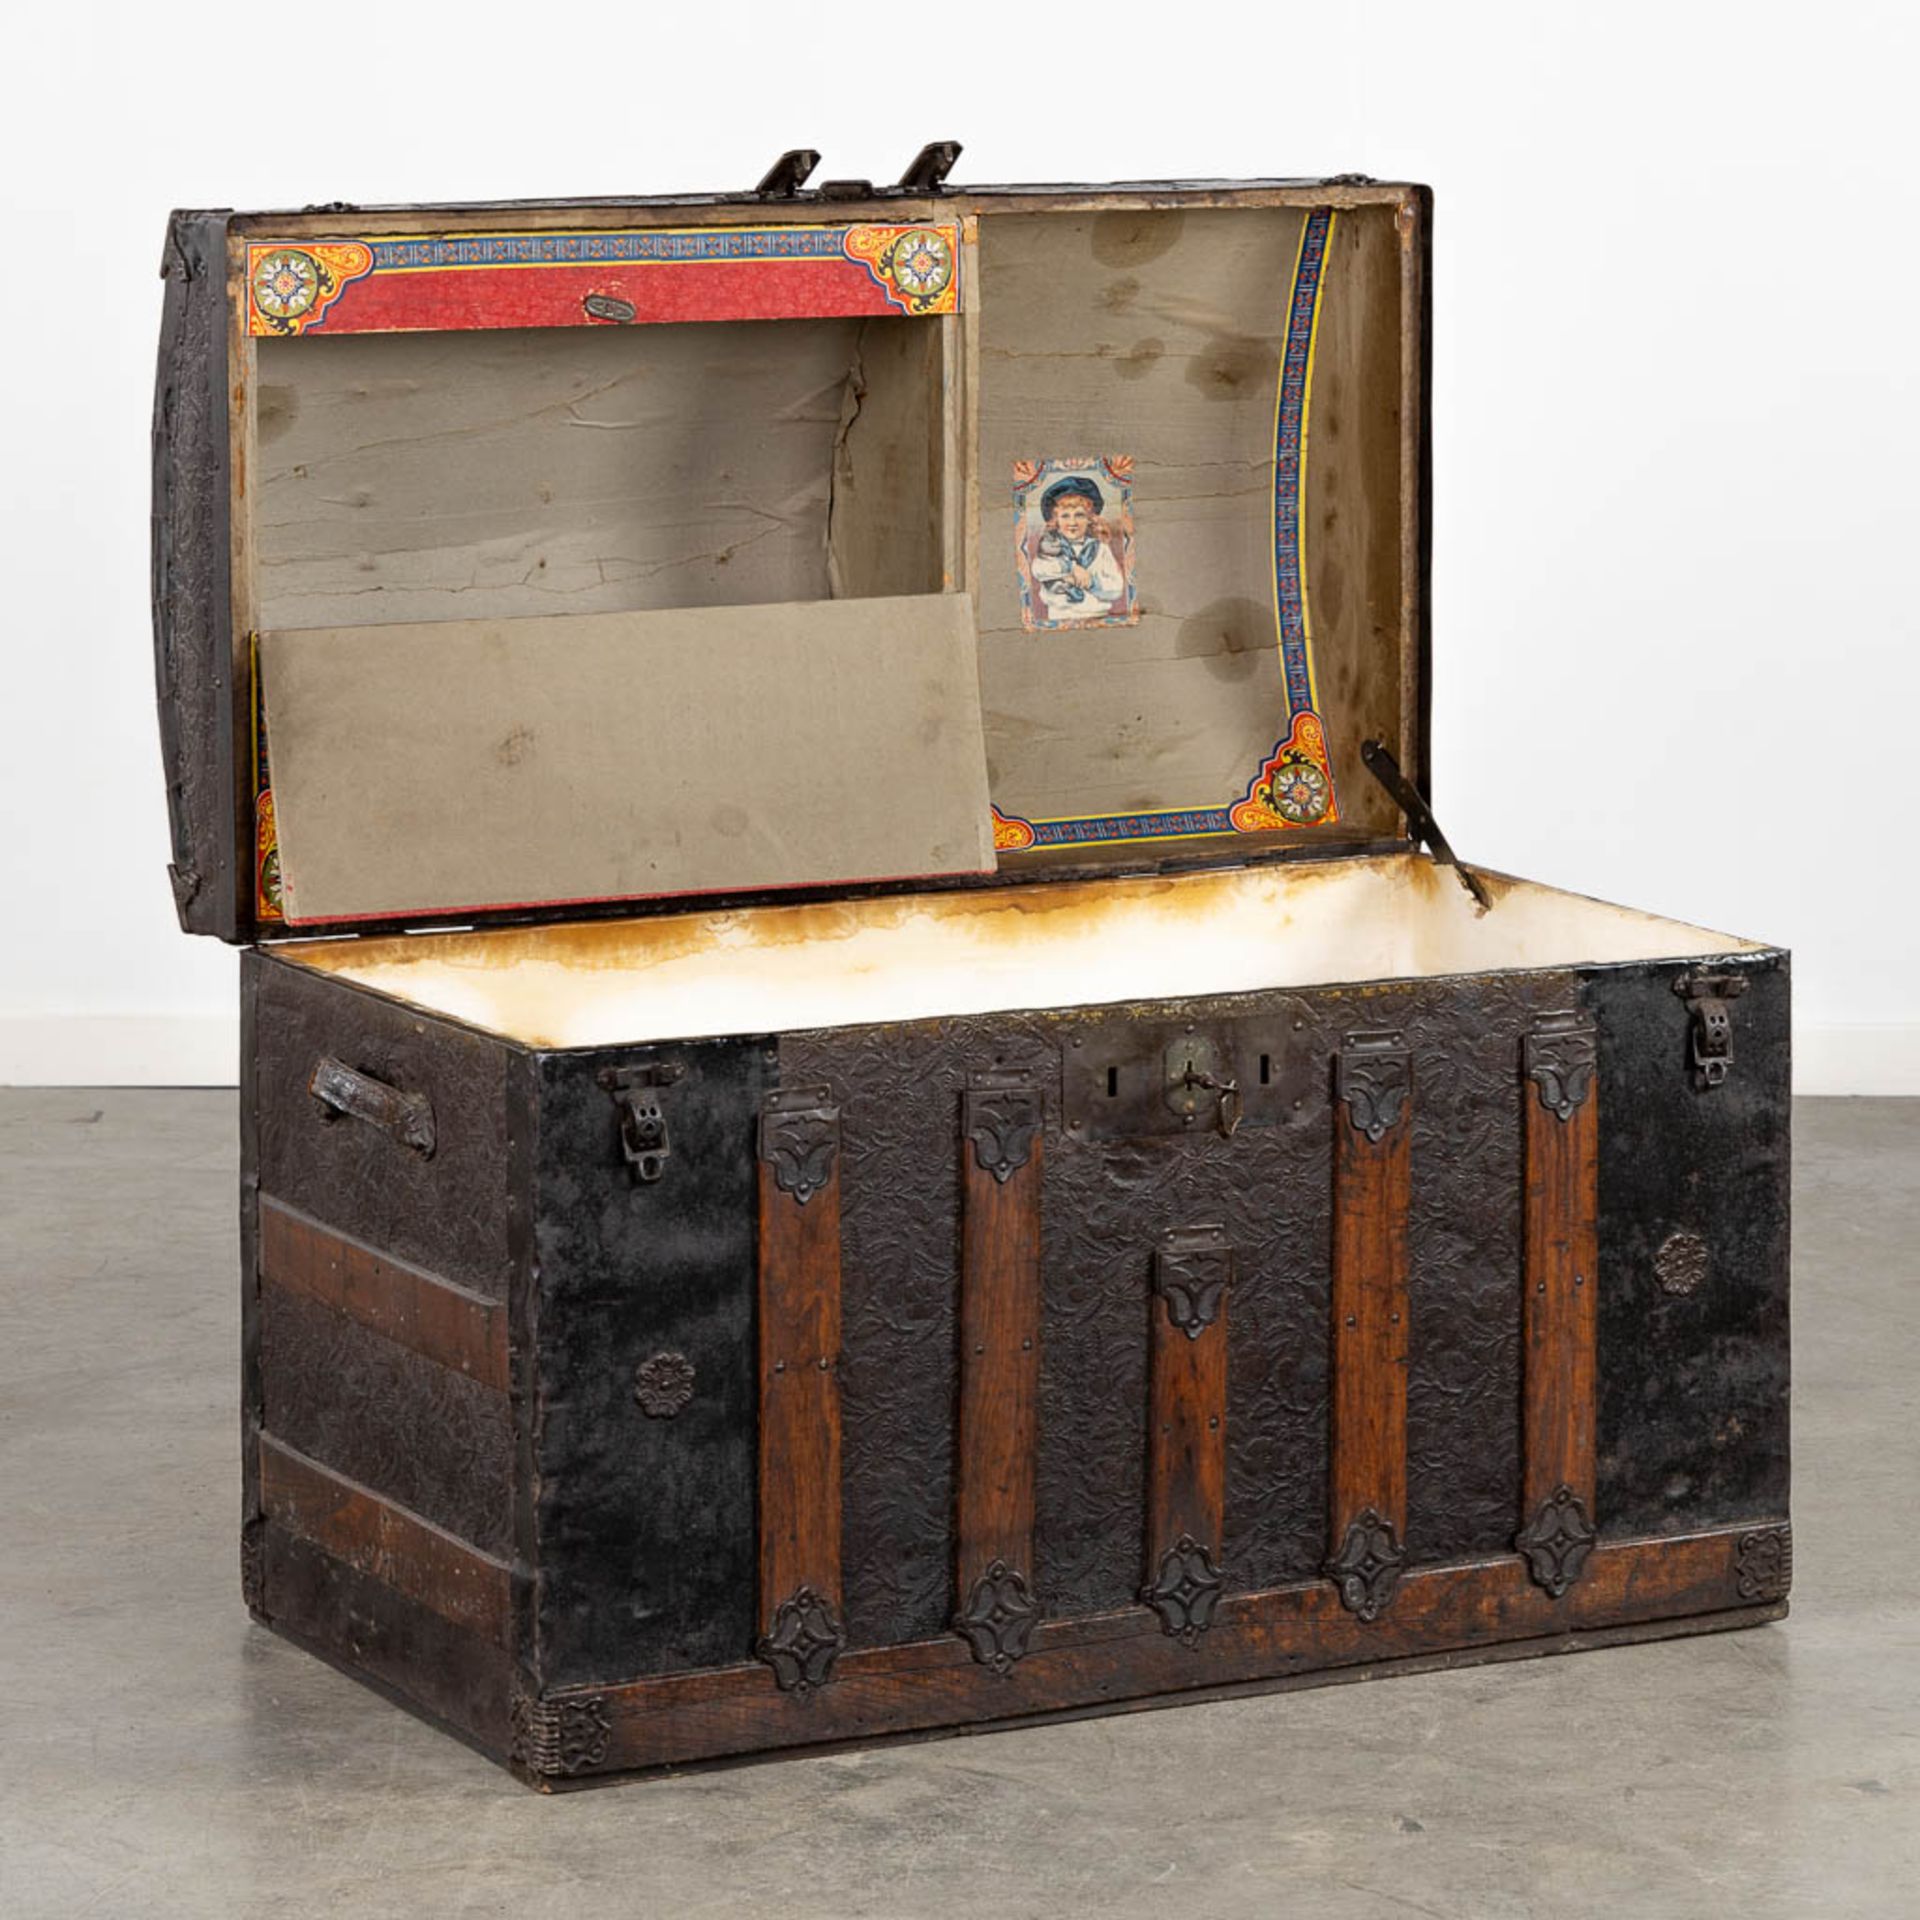 A large and antique chest decorated with leather and metal. (L:48 x W:95 x H:65 cm) - Bild 4 aus 13